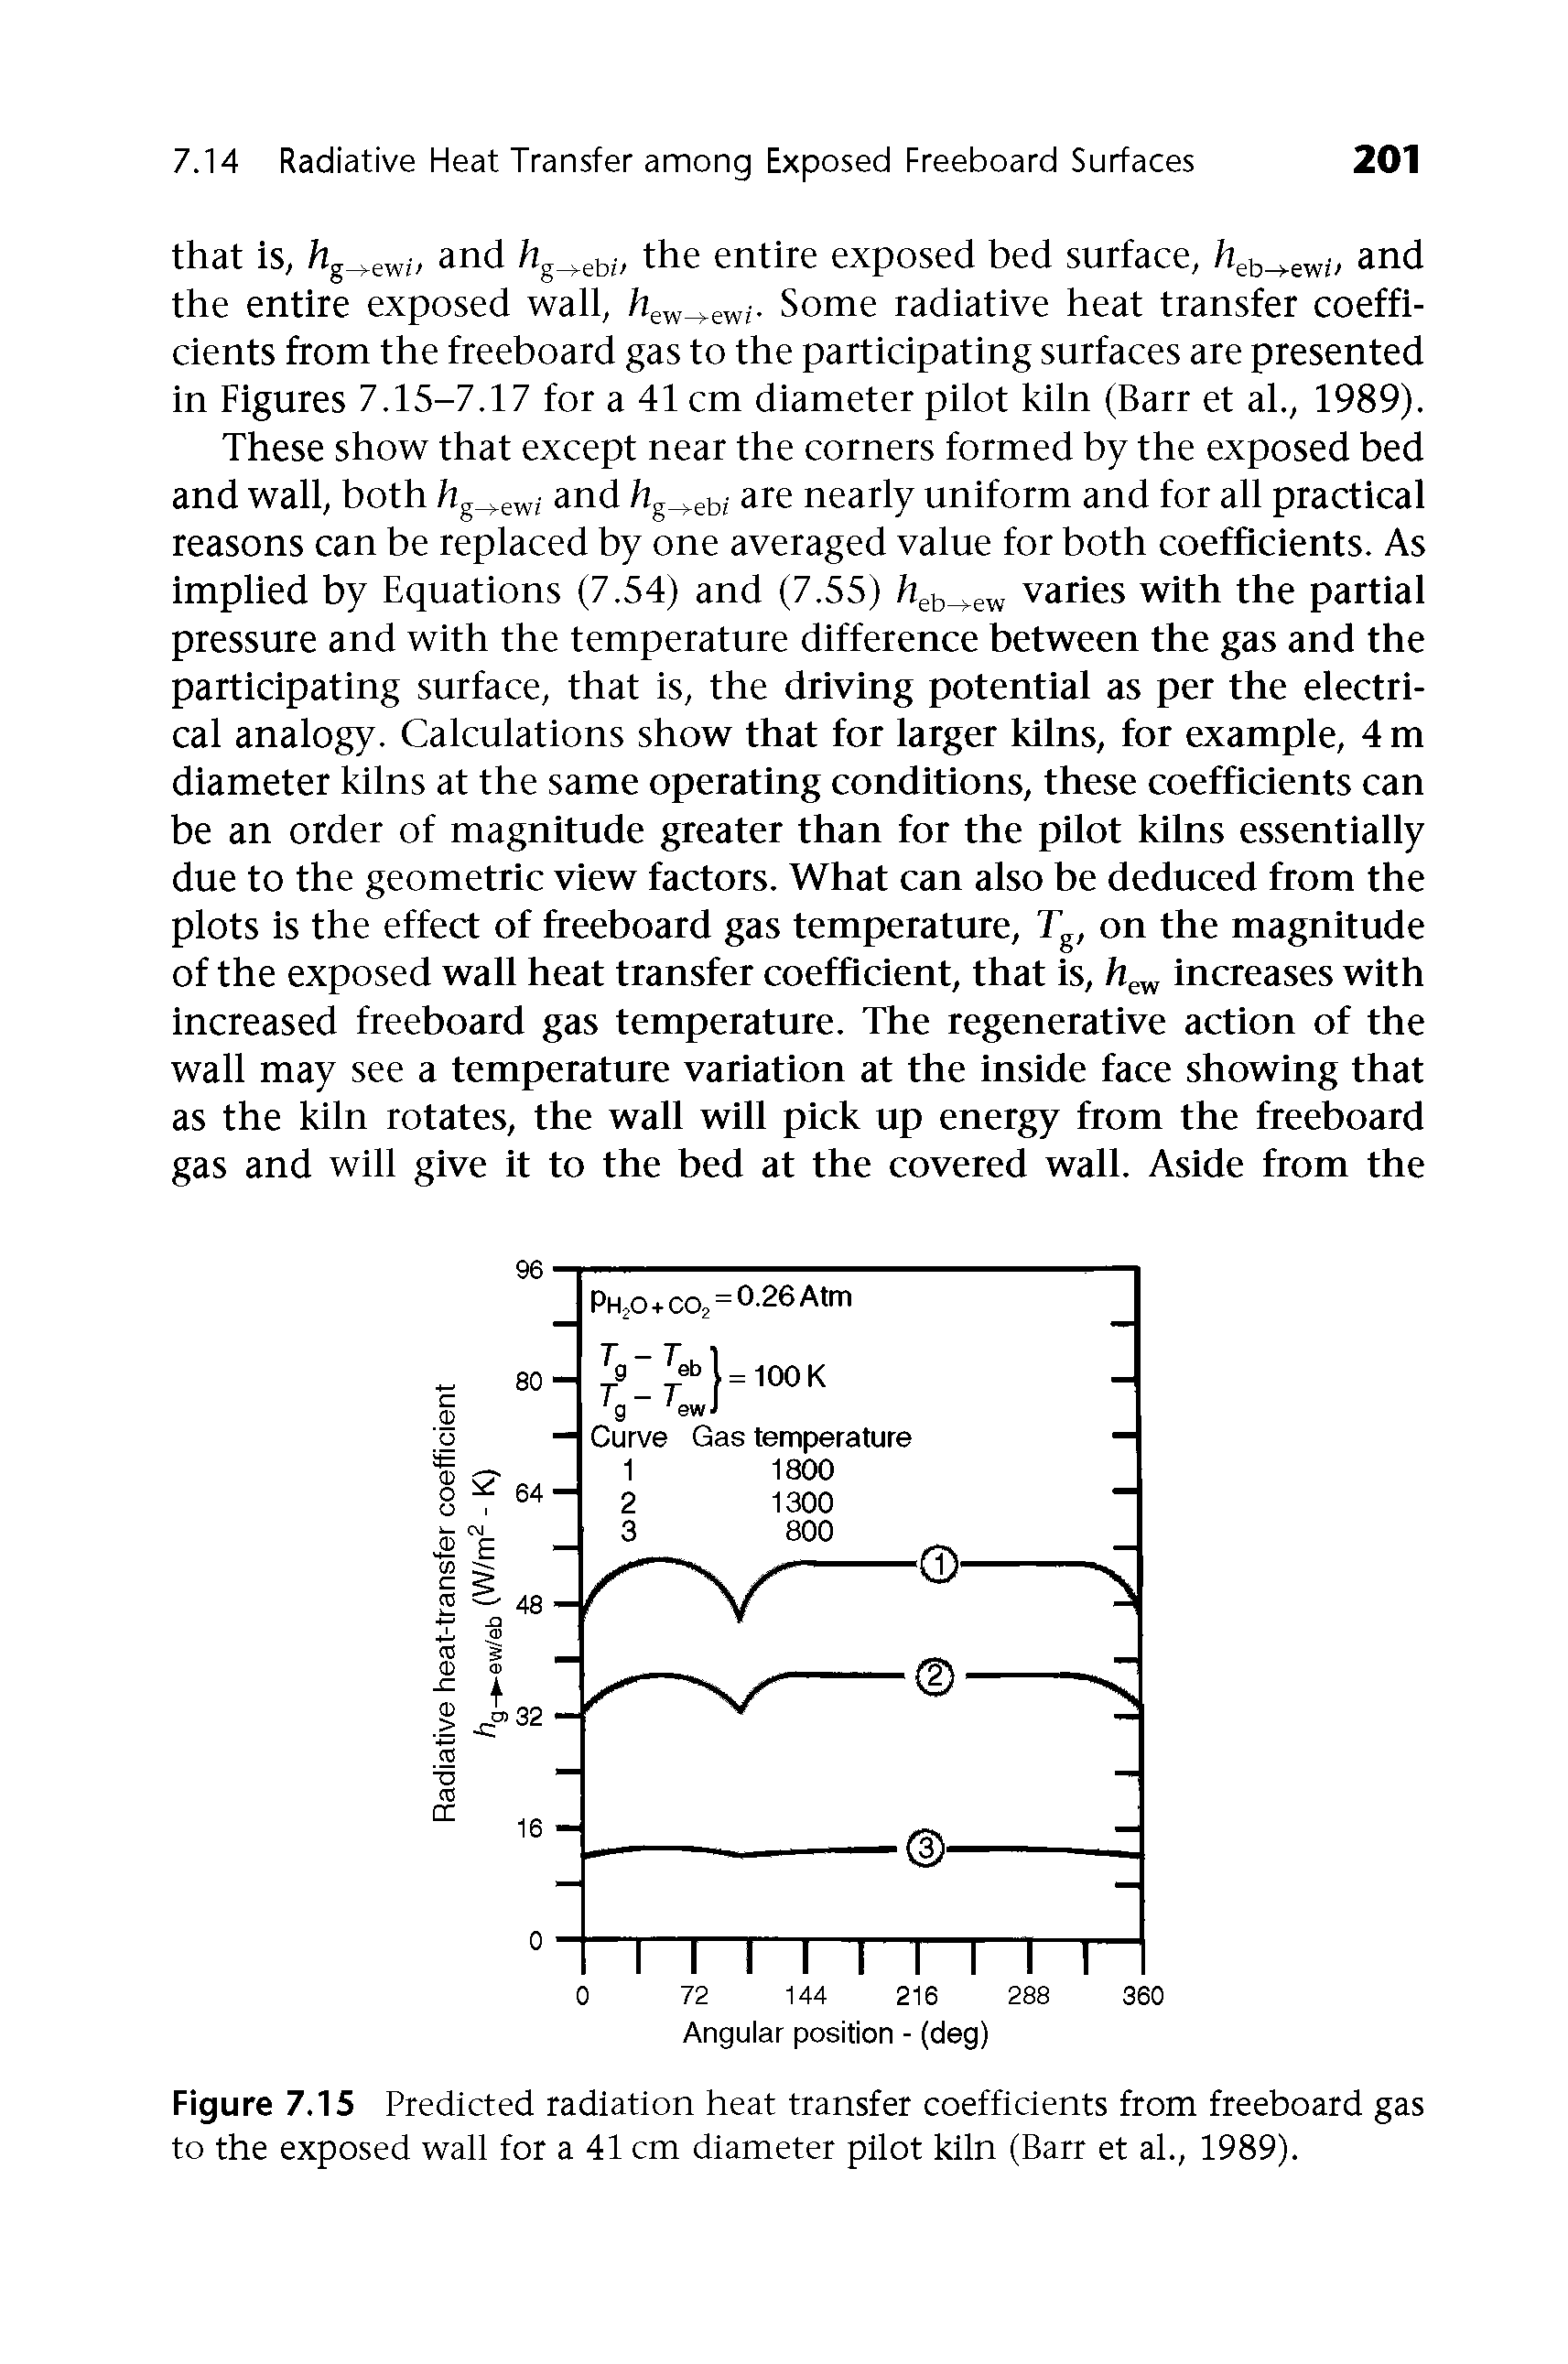 Figure 7.15 Predicted radiation heat transfer coefficients from freeboard gas to the exposed wall for a 41 cm diameter pilot kiln (Barr et al., 1989).